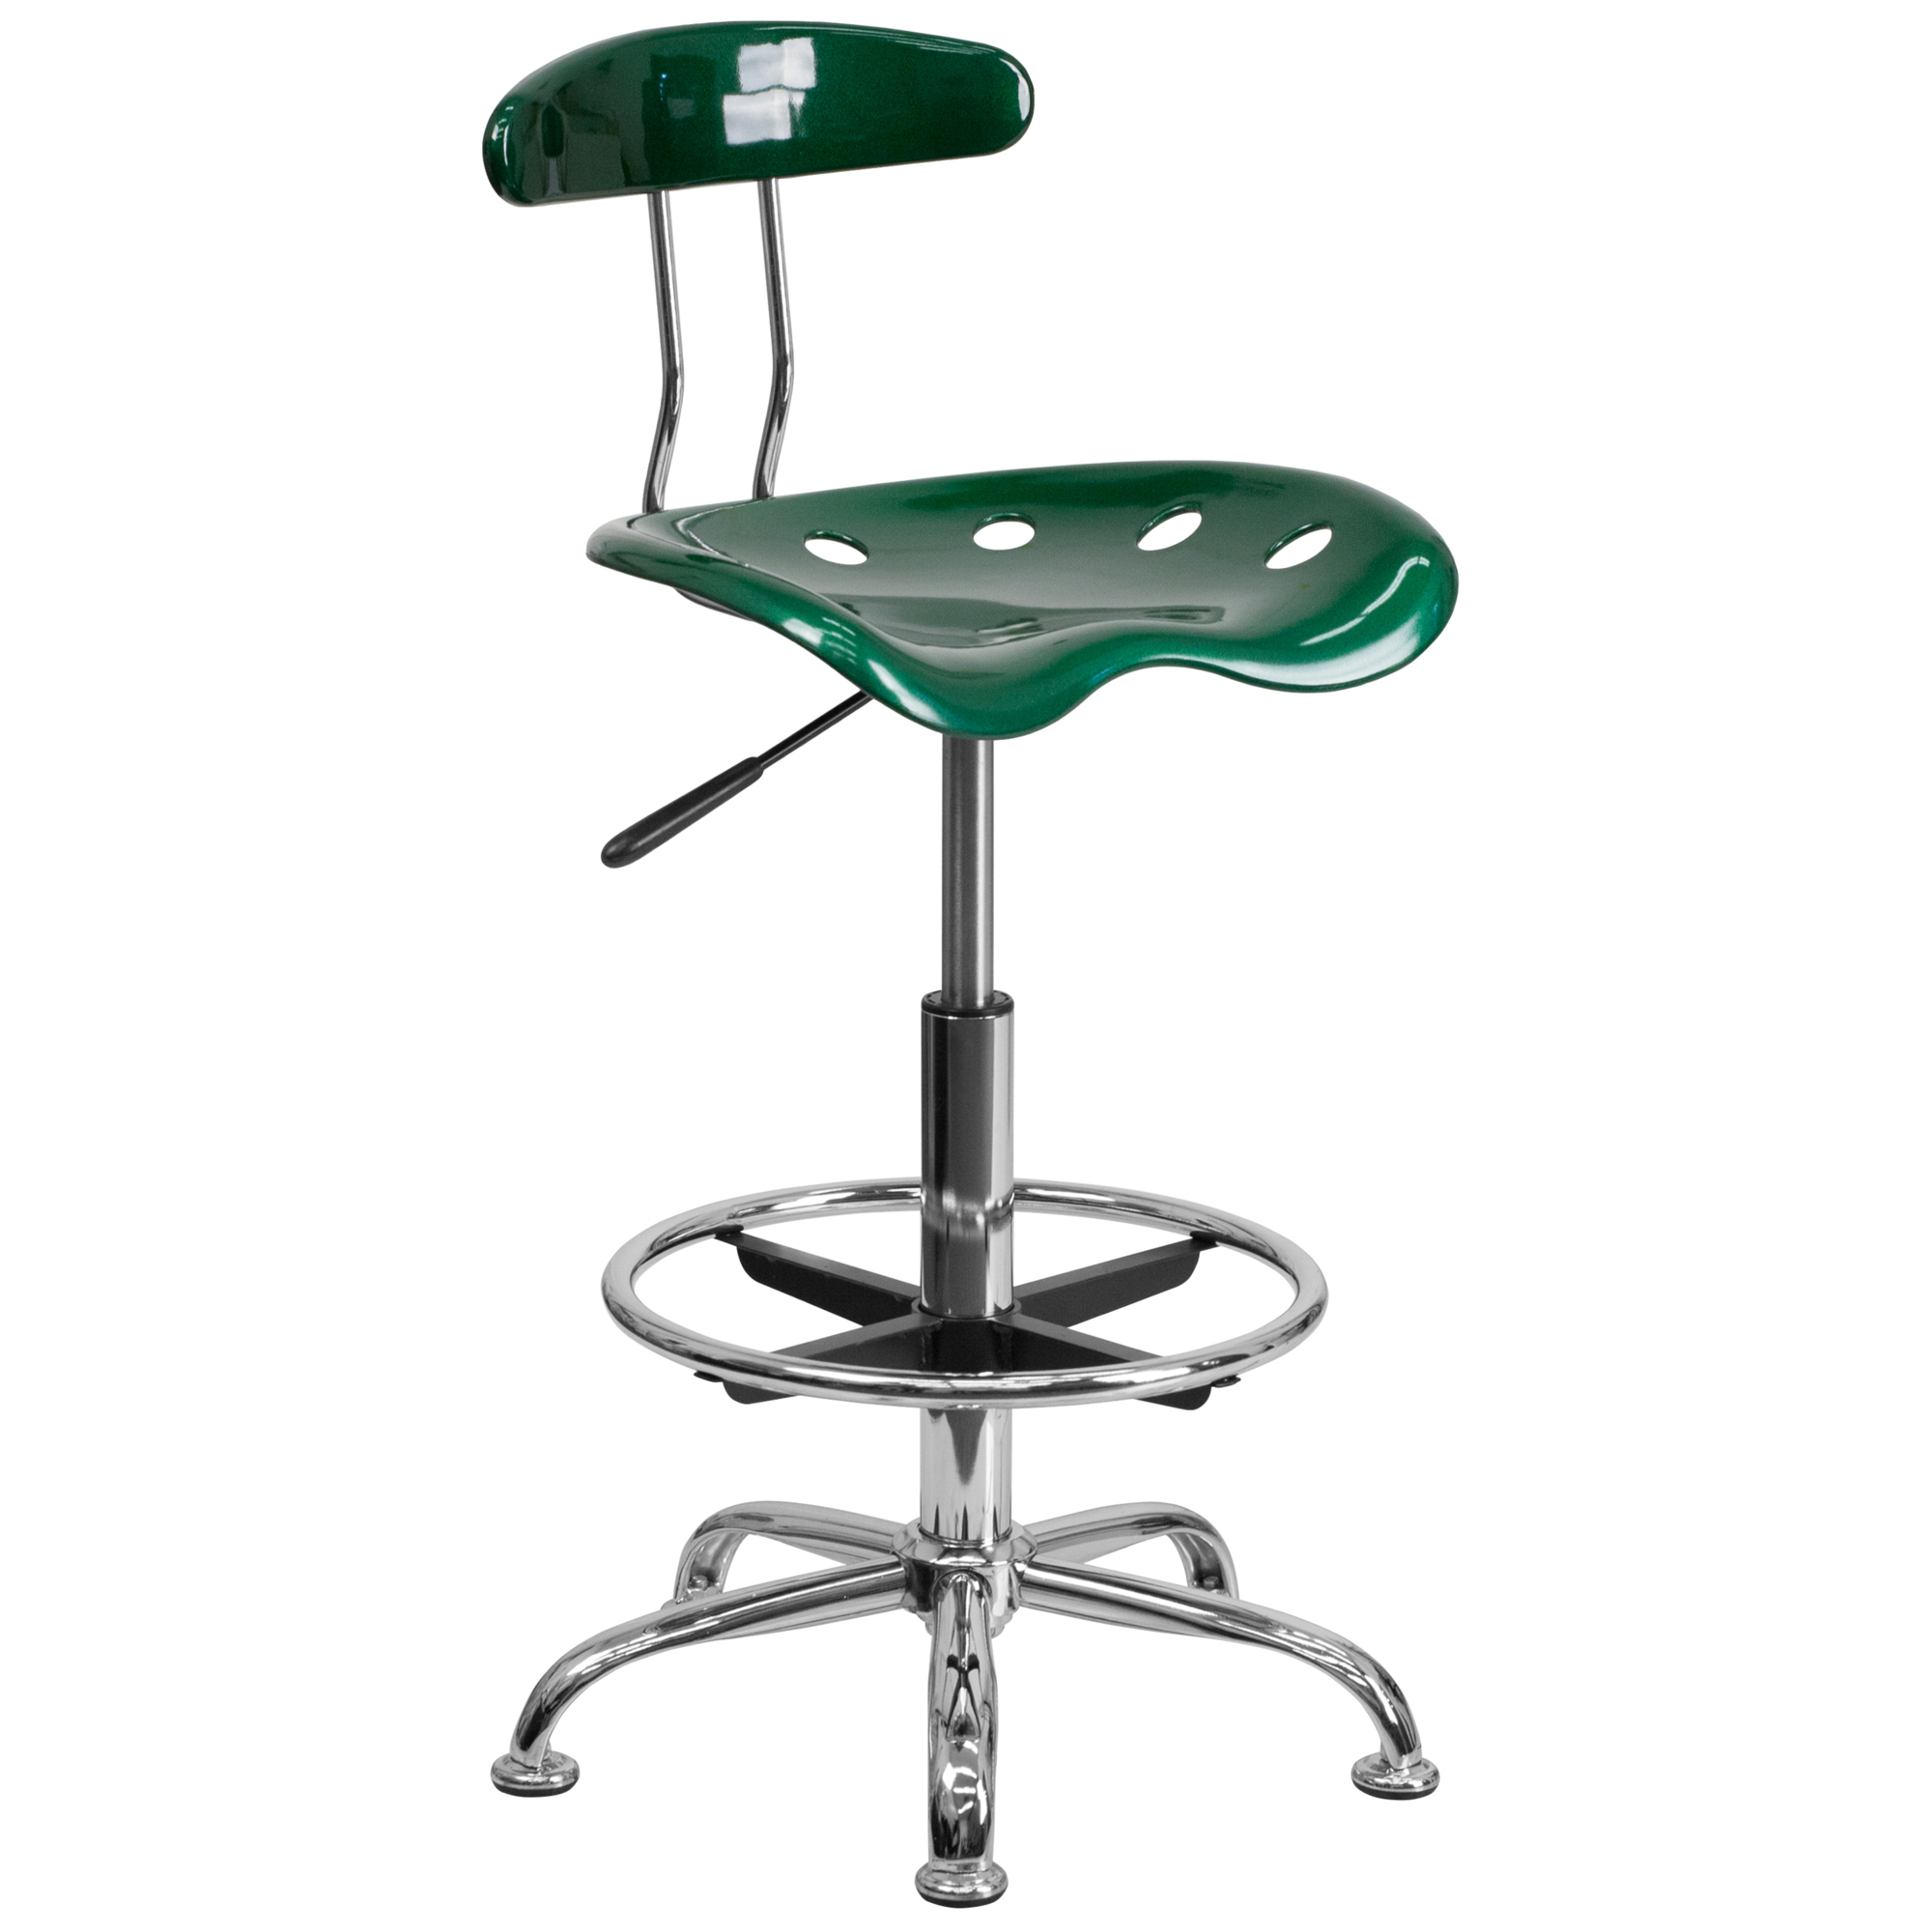 Flash Furniture, Vibrant Green and Chrome Drafting Stool, Primary Color Green, Included (qty.) 1, Model LF215GN